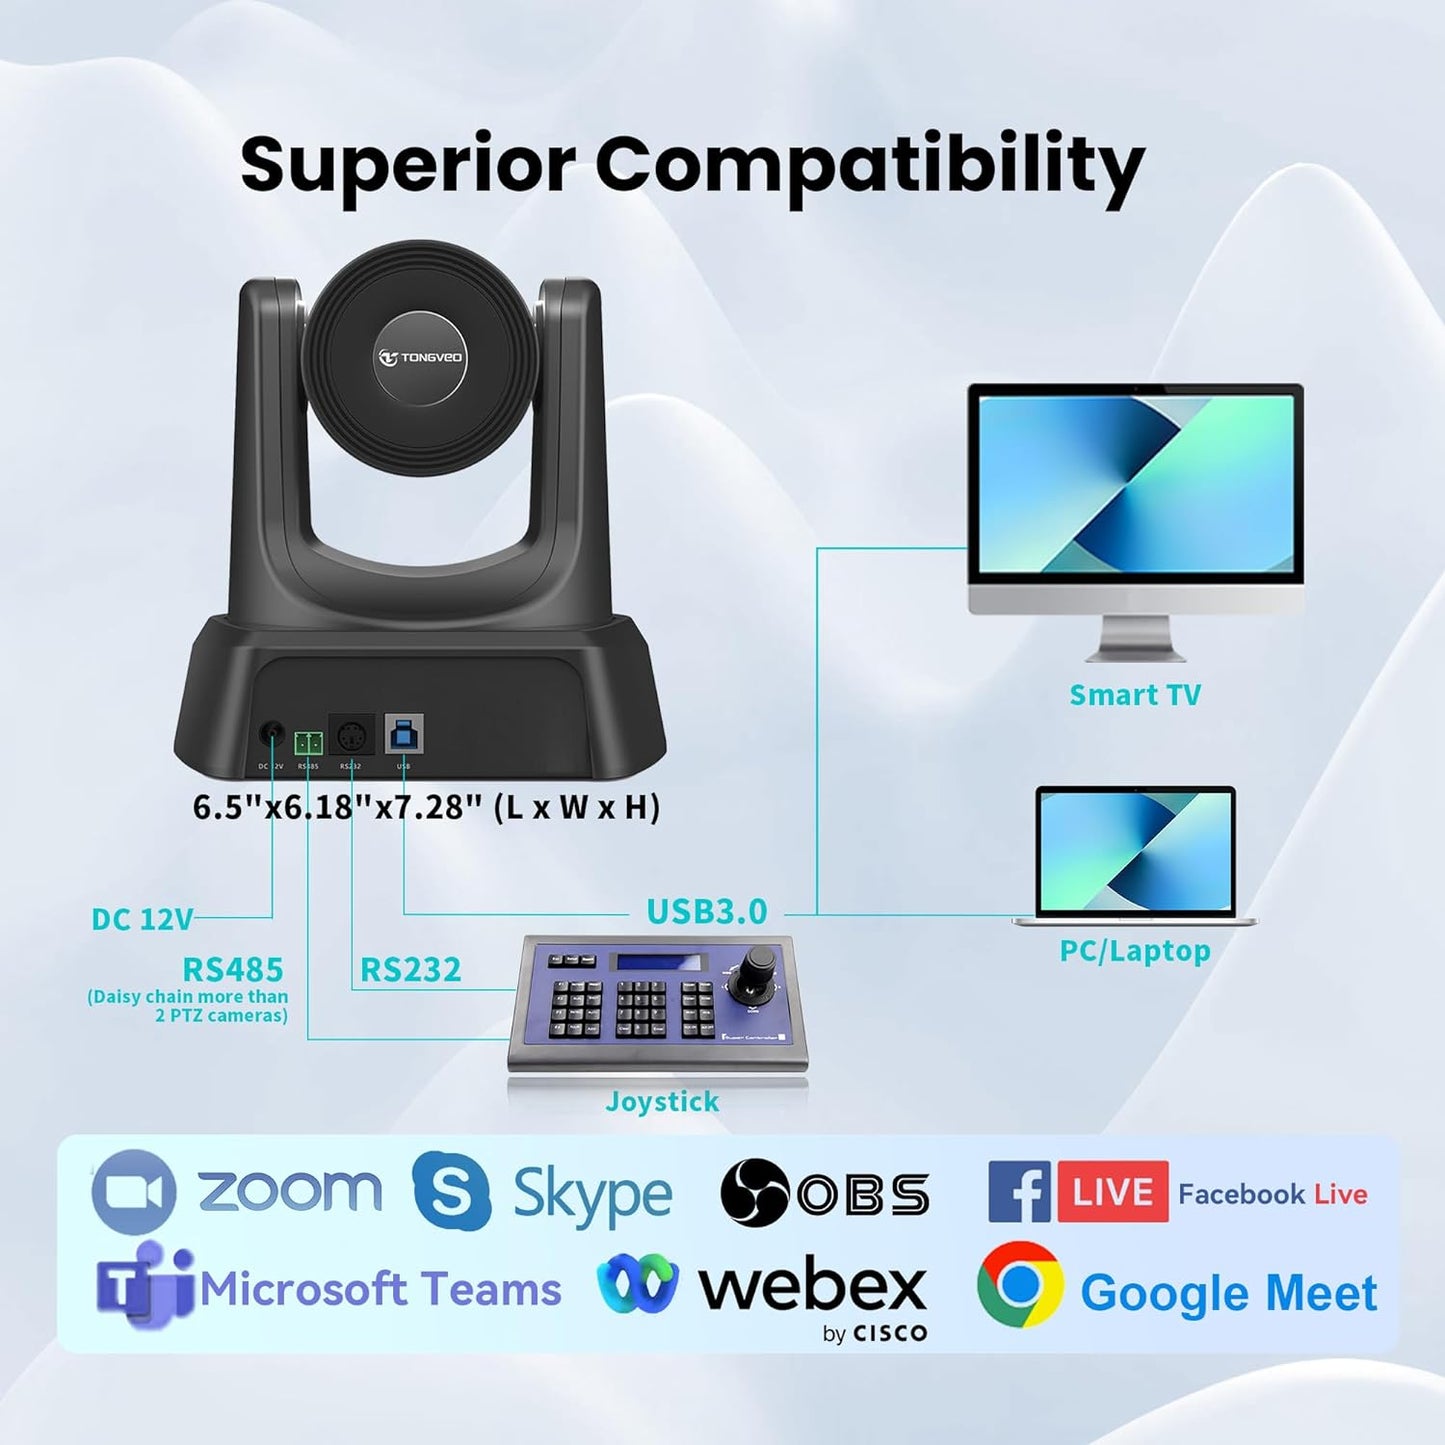 TONGVEO 3X Conference Room Camera System, 1080P 60FPS USB 3.0 3X Optical Zoom PTZ Camera and Wireless Bluetooth Speakerphone with Microphones, Works with Zoom, OBS, Skype, Teams and M